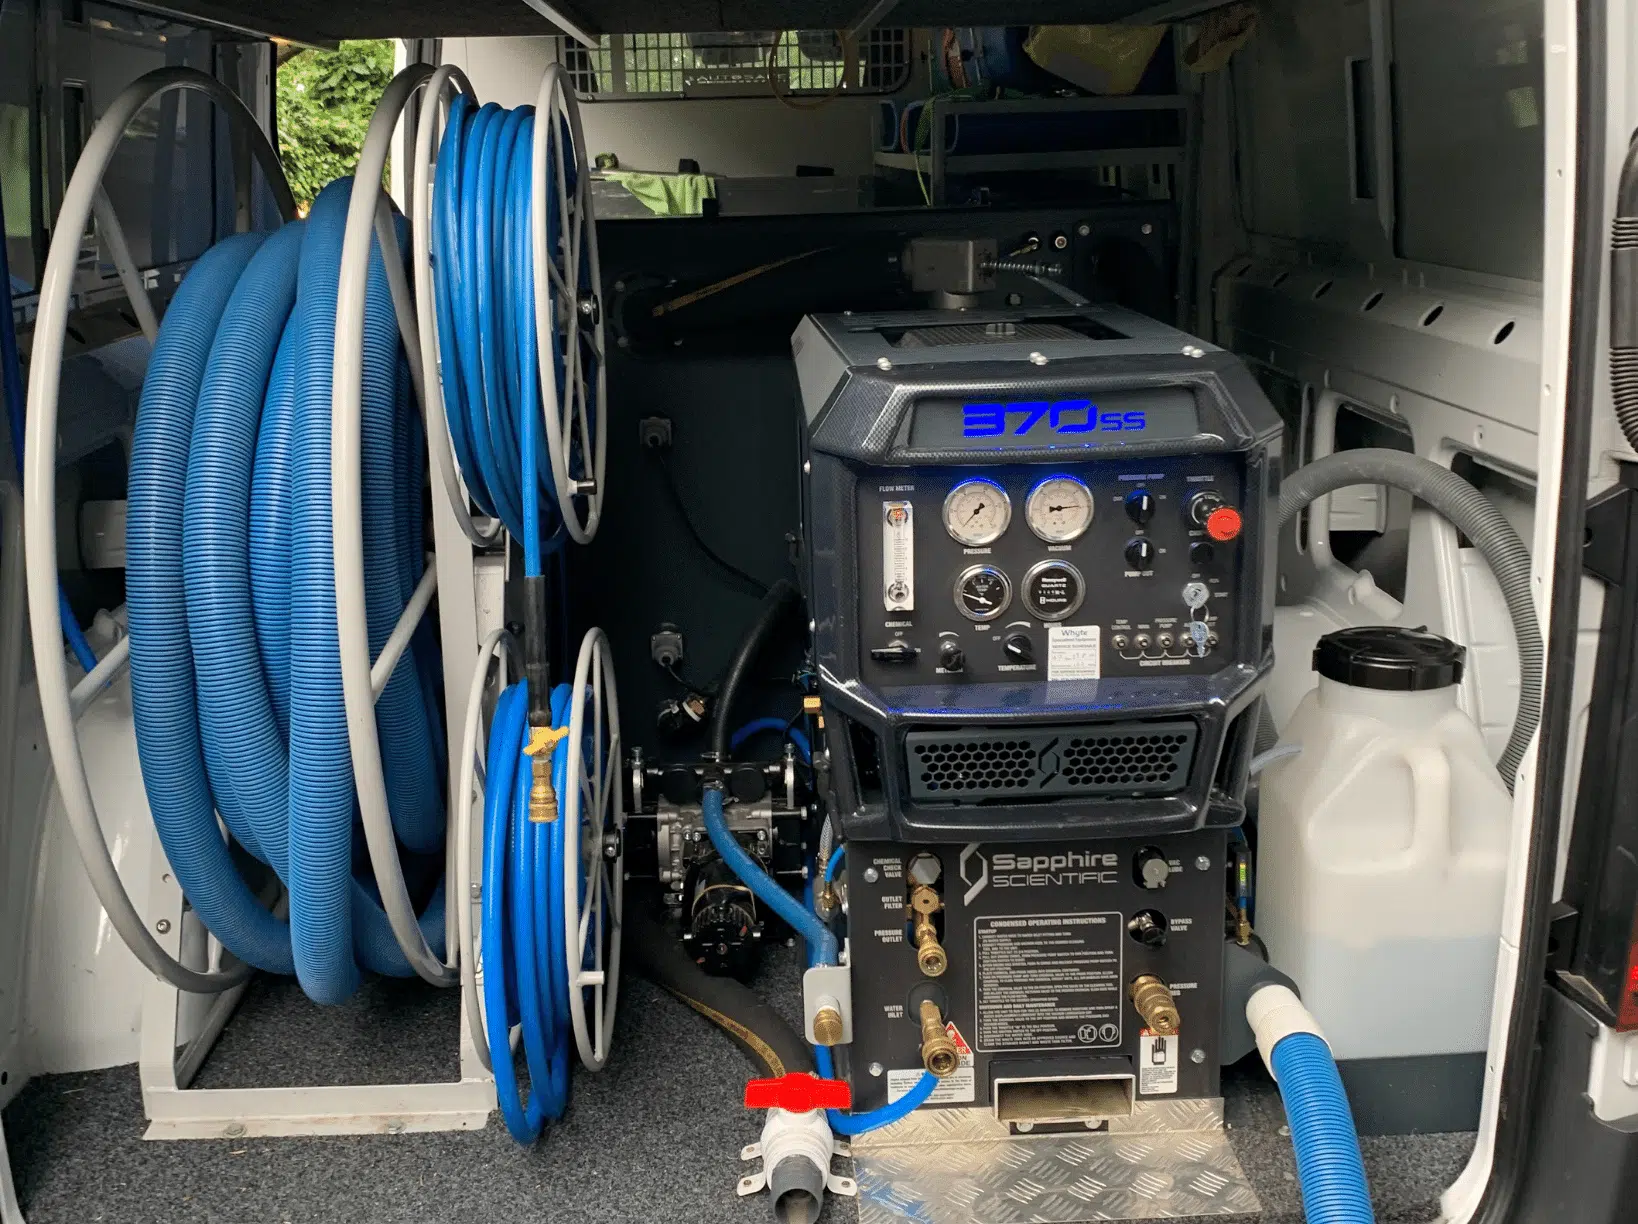 Carpet Steam Cleaning Services Equipment